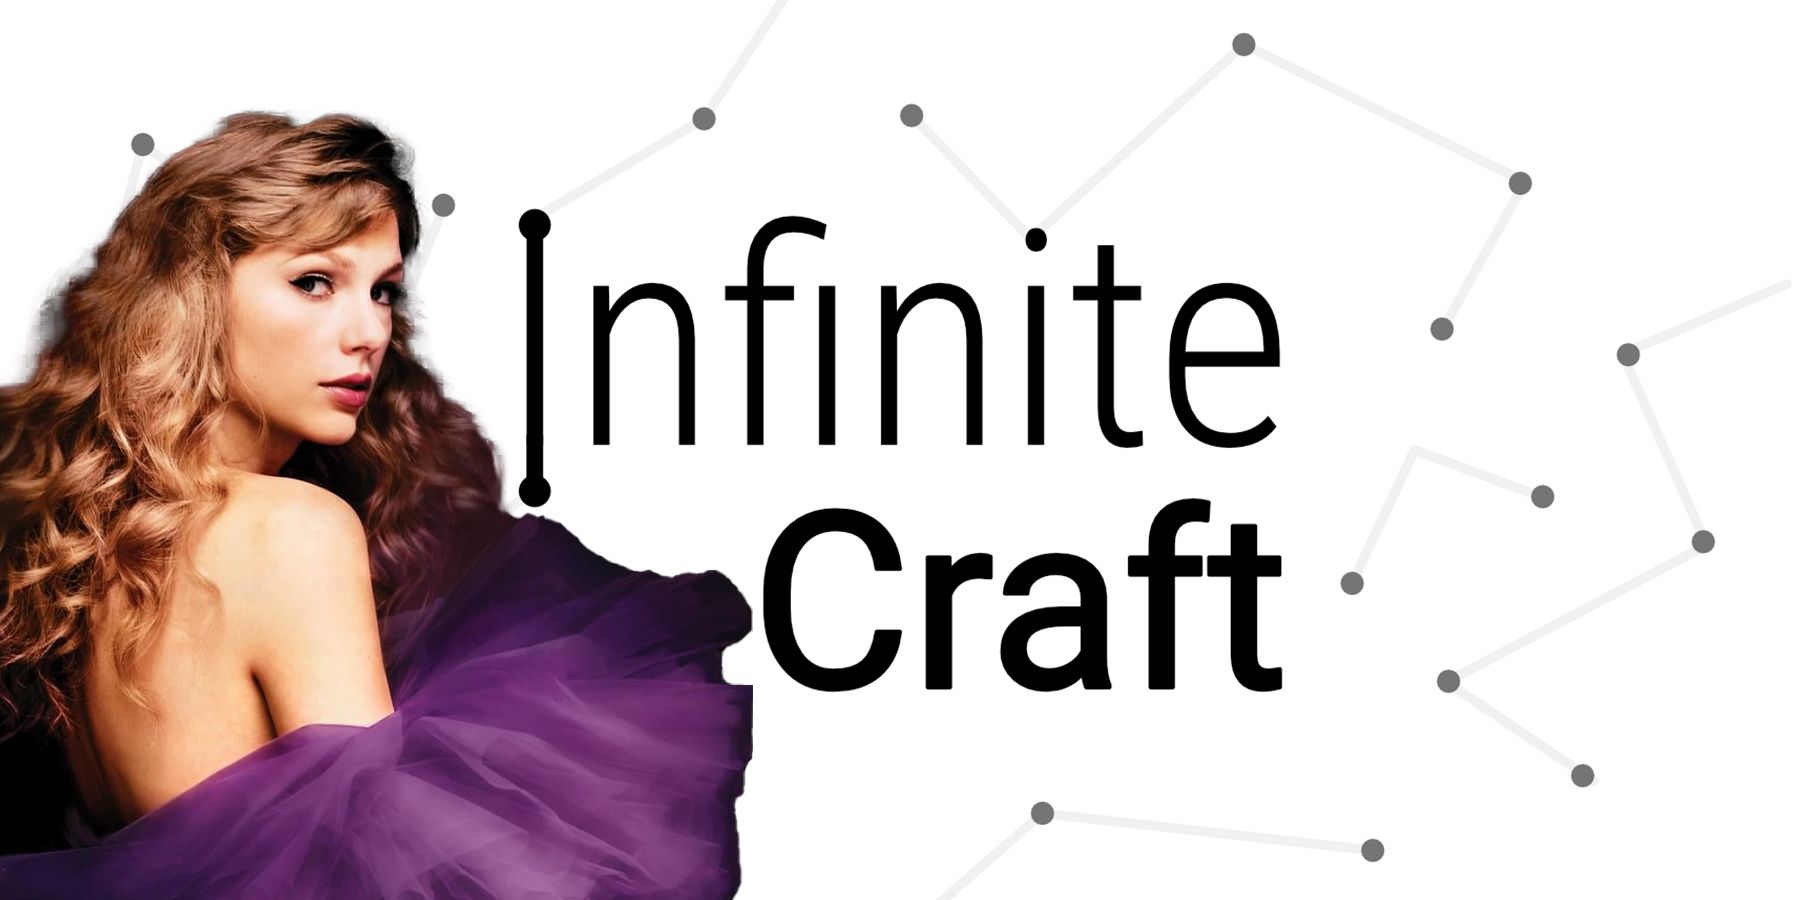 how to make taylor swift in infinite craft